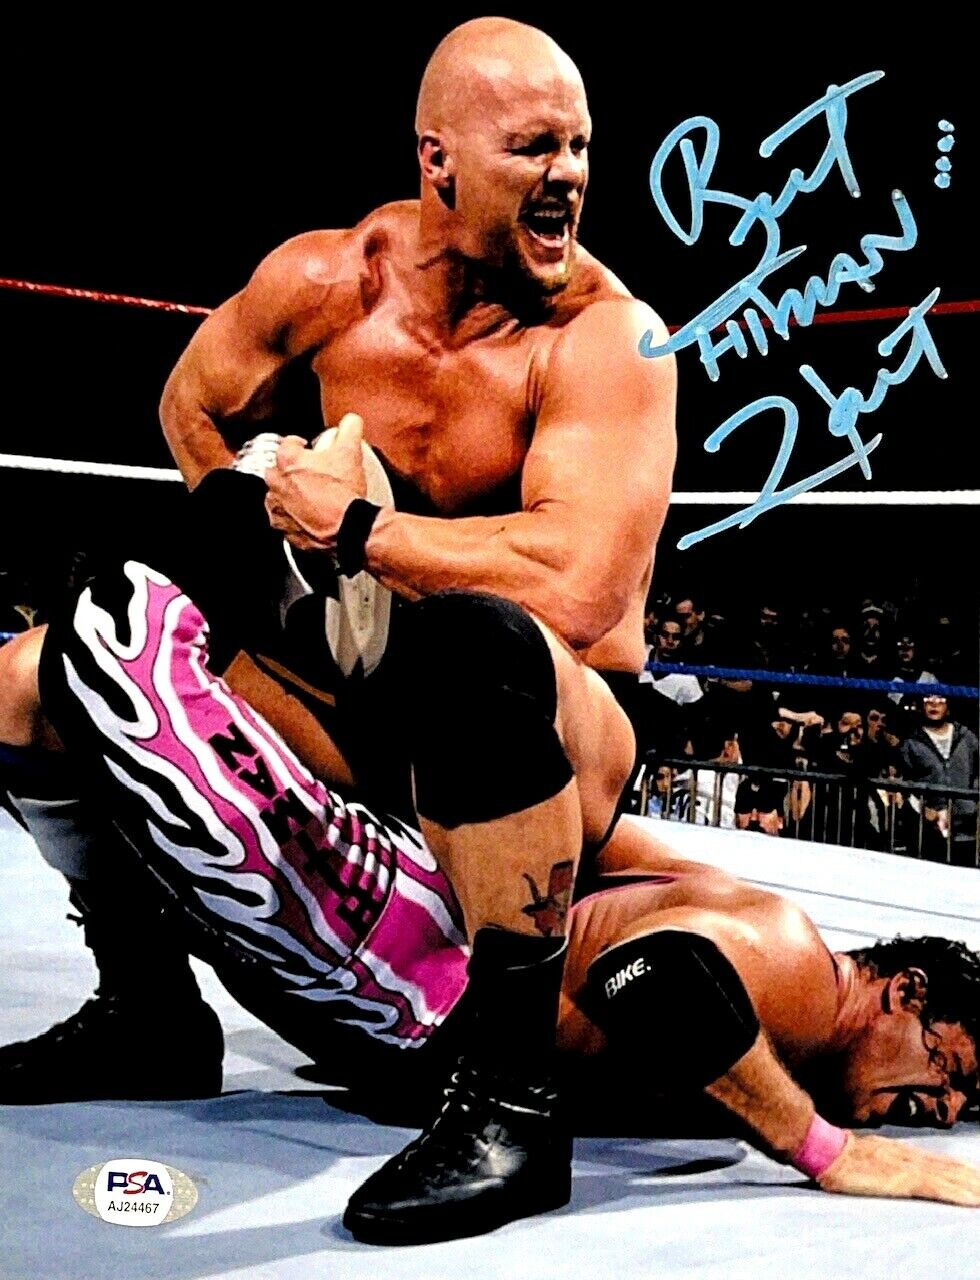 WWE BRET HART HAND SIGNED AUTOGRAPHED 8X10 WRESTLING Photo Poster painting WITH PSA DNA COA 4